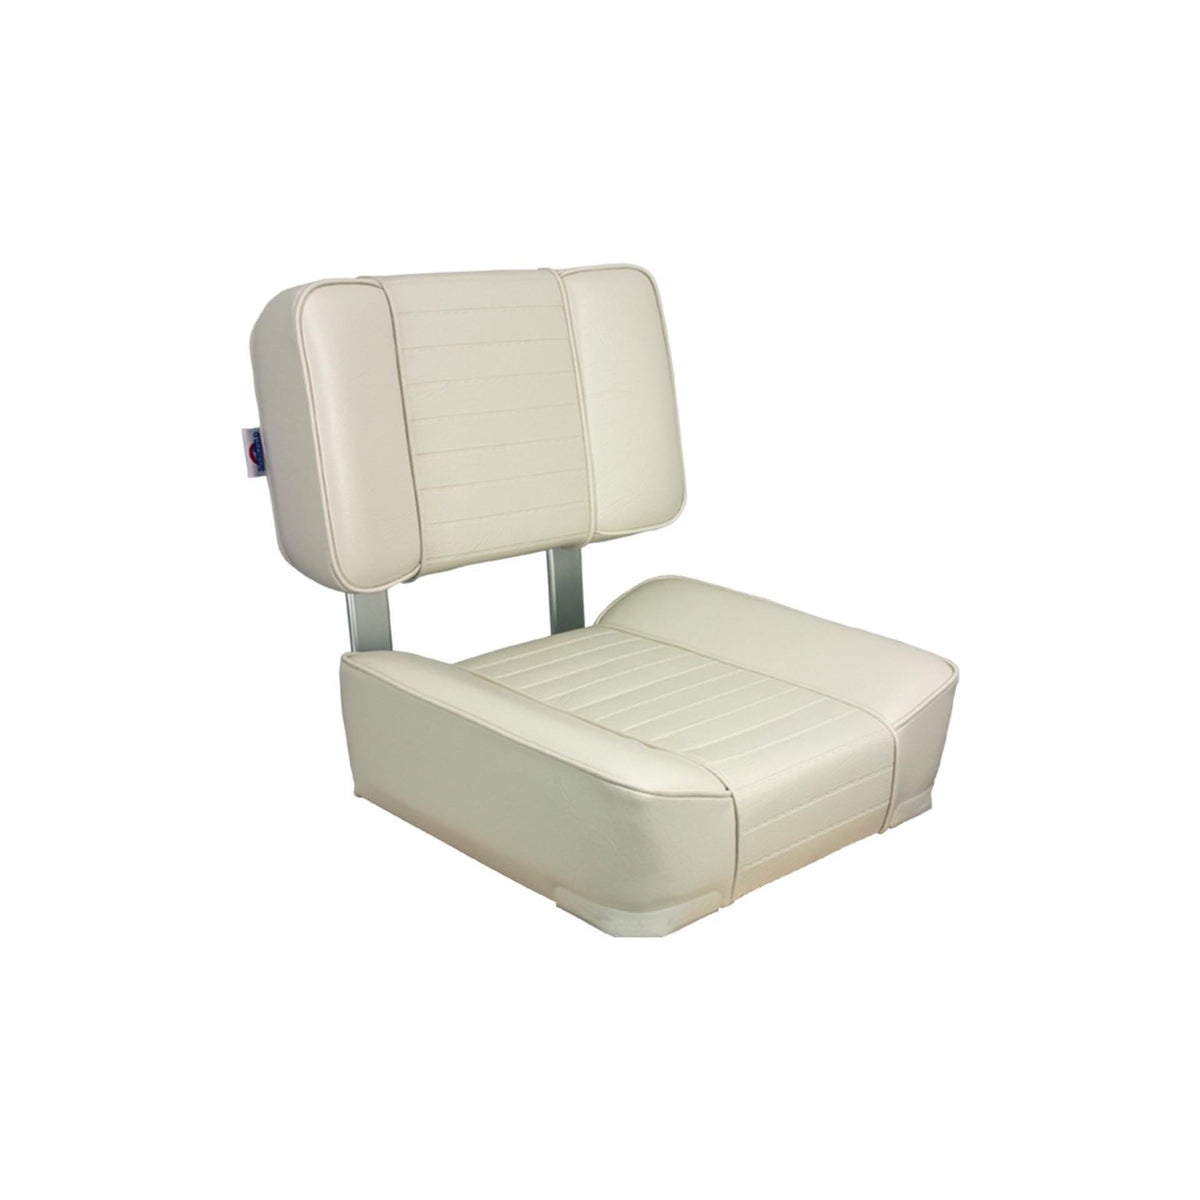 Springfield Oversized - Not Qualified for Free Shipping Springfield Deluxe Upholstered Seat White #1040809